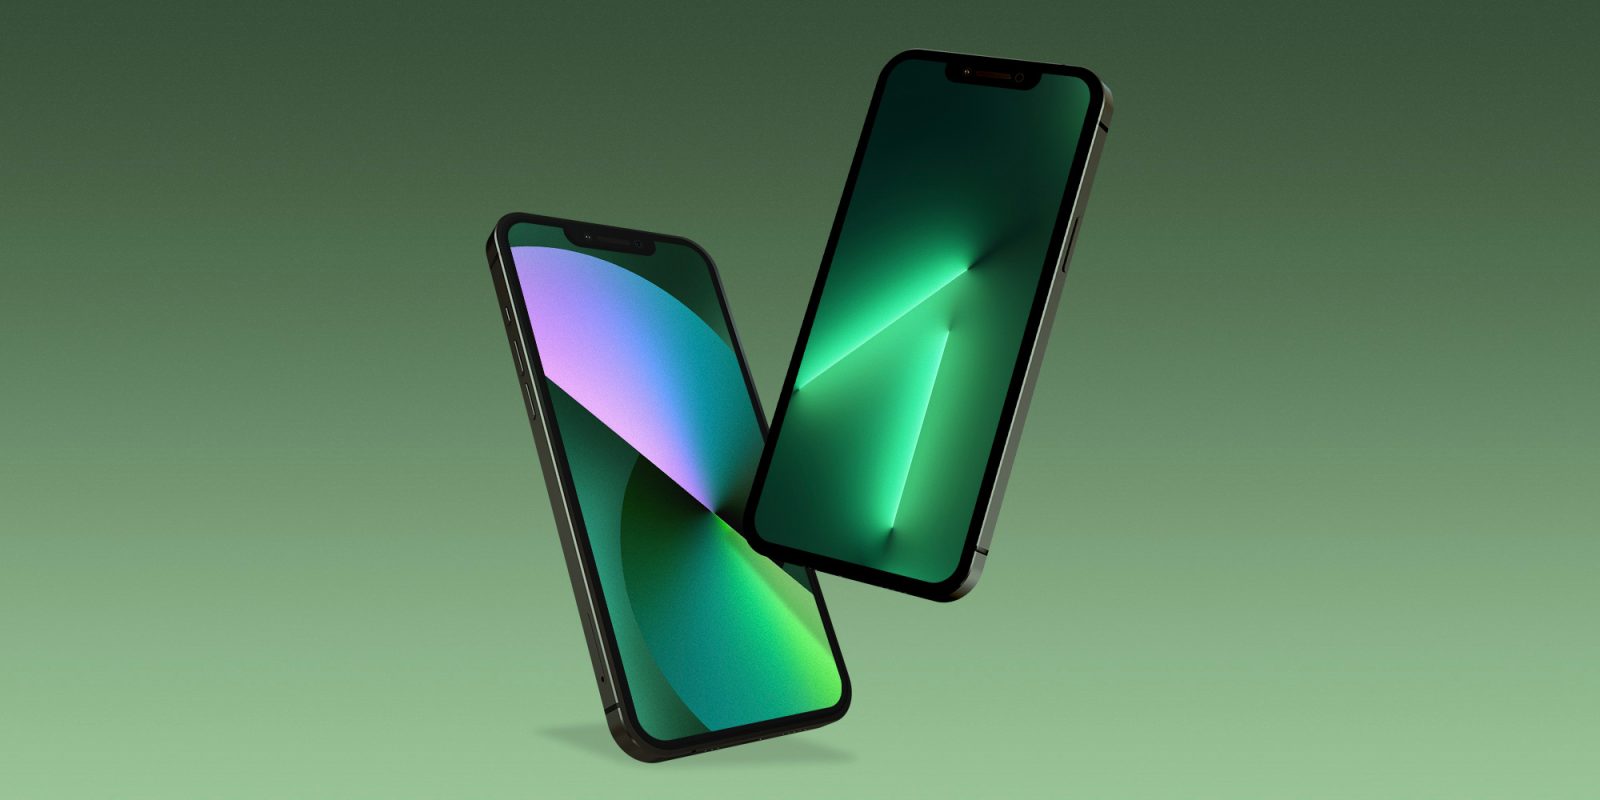 Download the new green iphone wallpapers right here